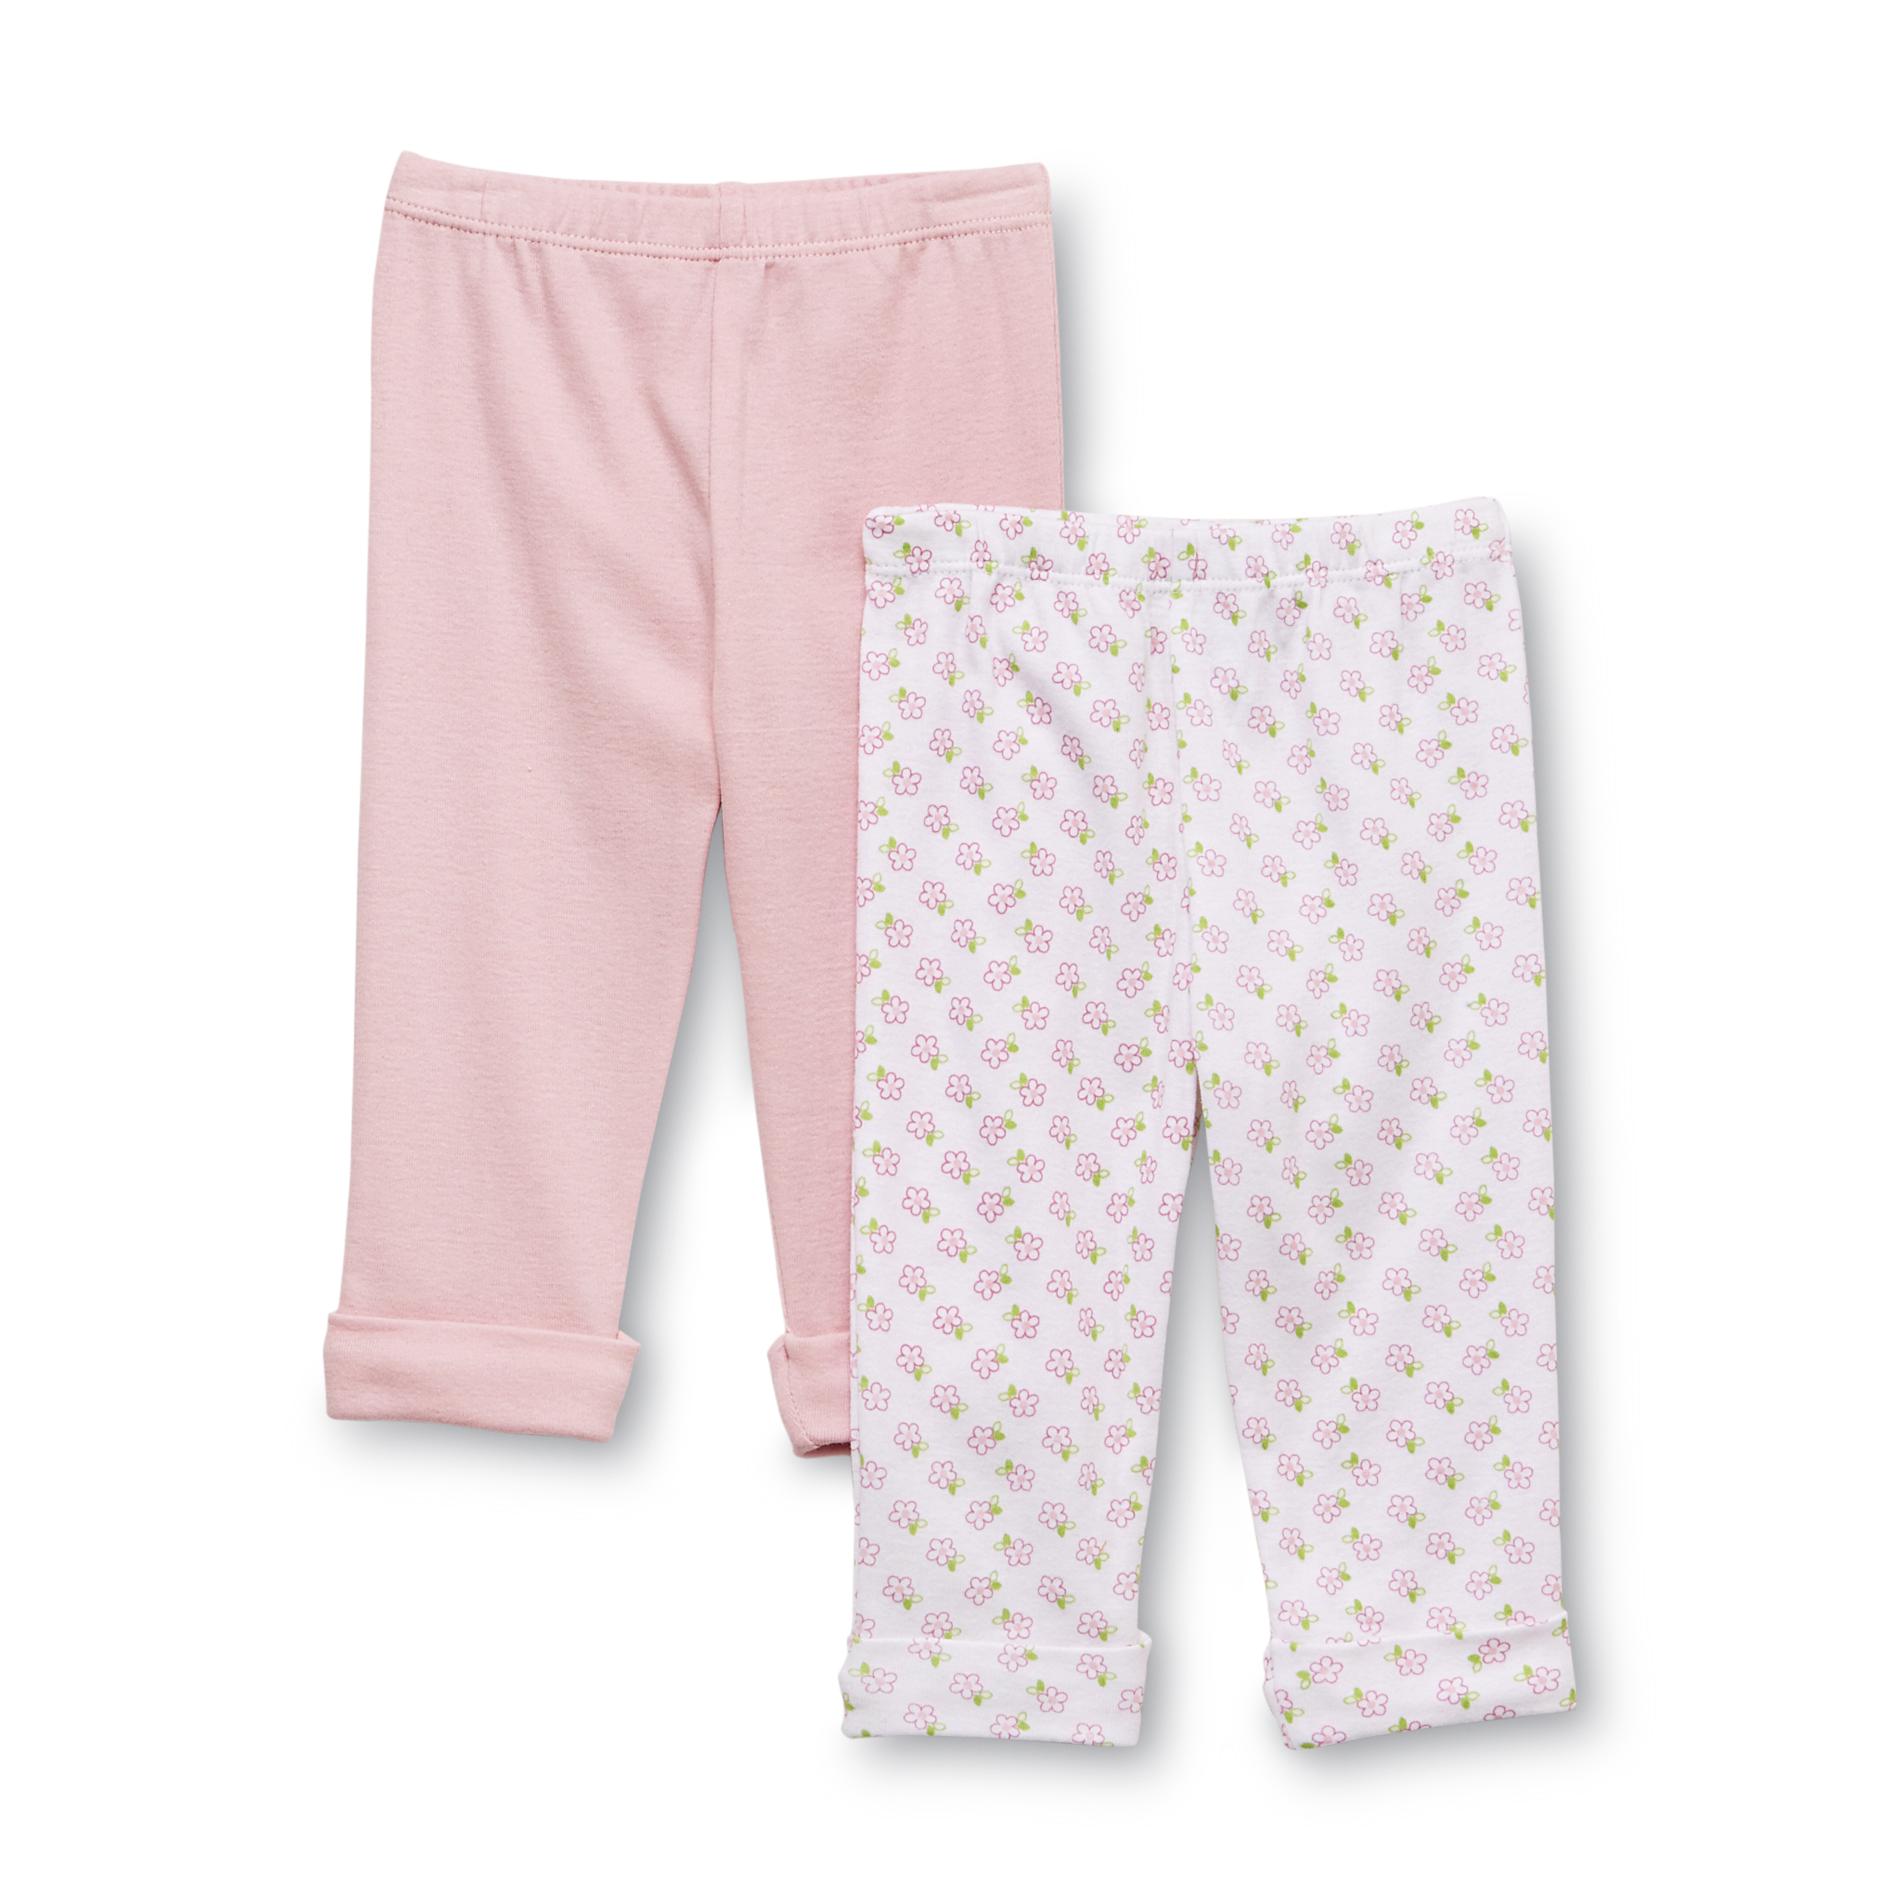 Welcome to the World Newborn Girl's 2-Pack Jersey Knit Pants - Floral